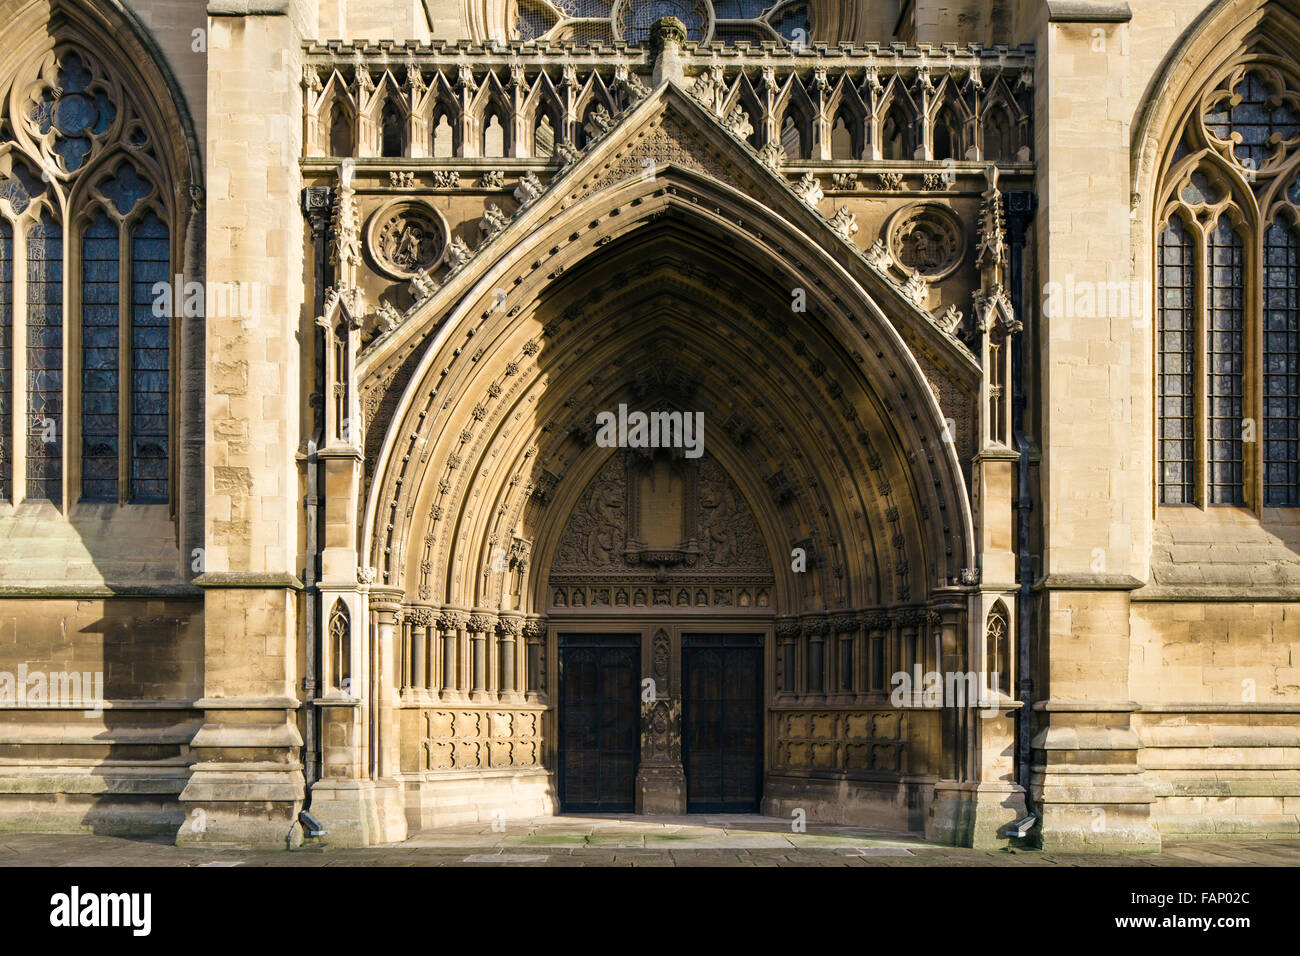 West front Gothic revival portal of Bristol Cathedral, UK, designed by Victorian architect George Street. Stock Photo